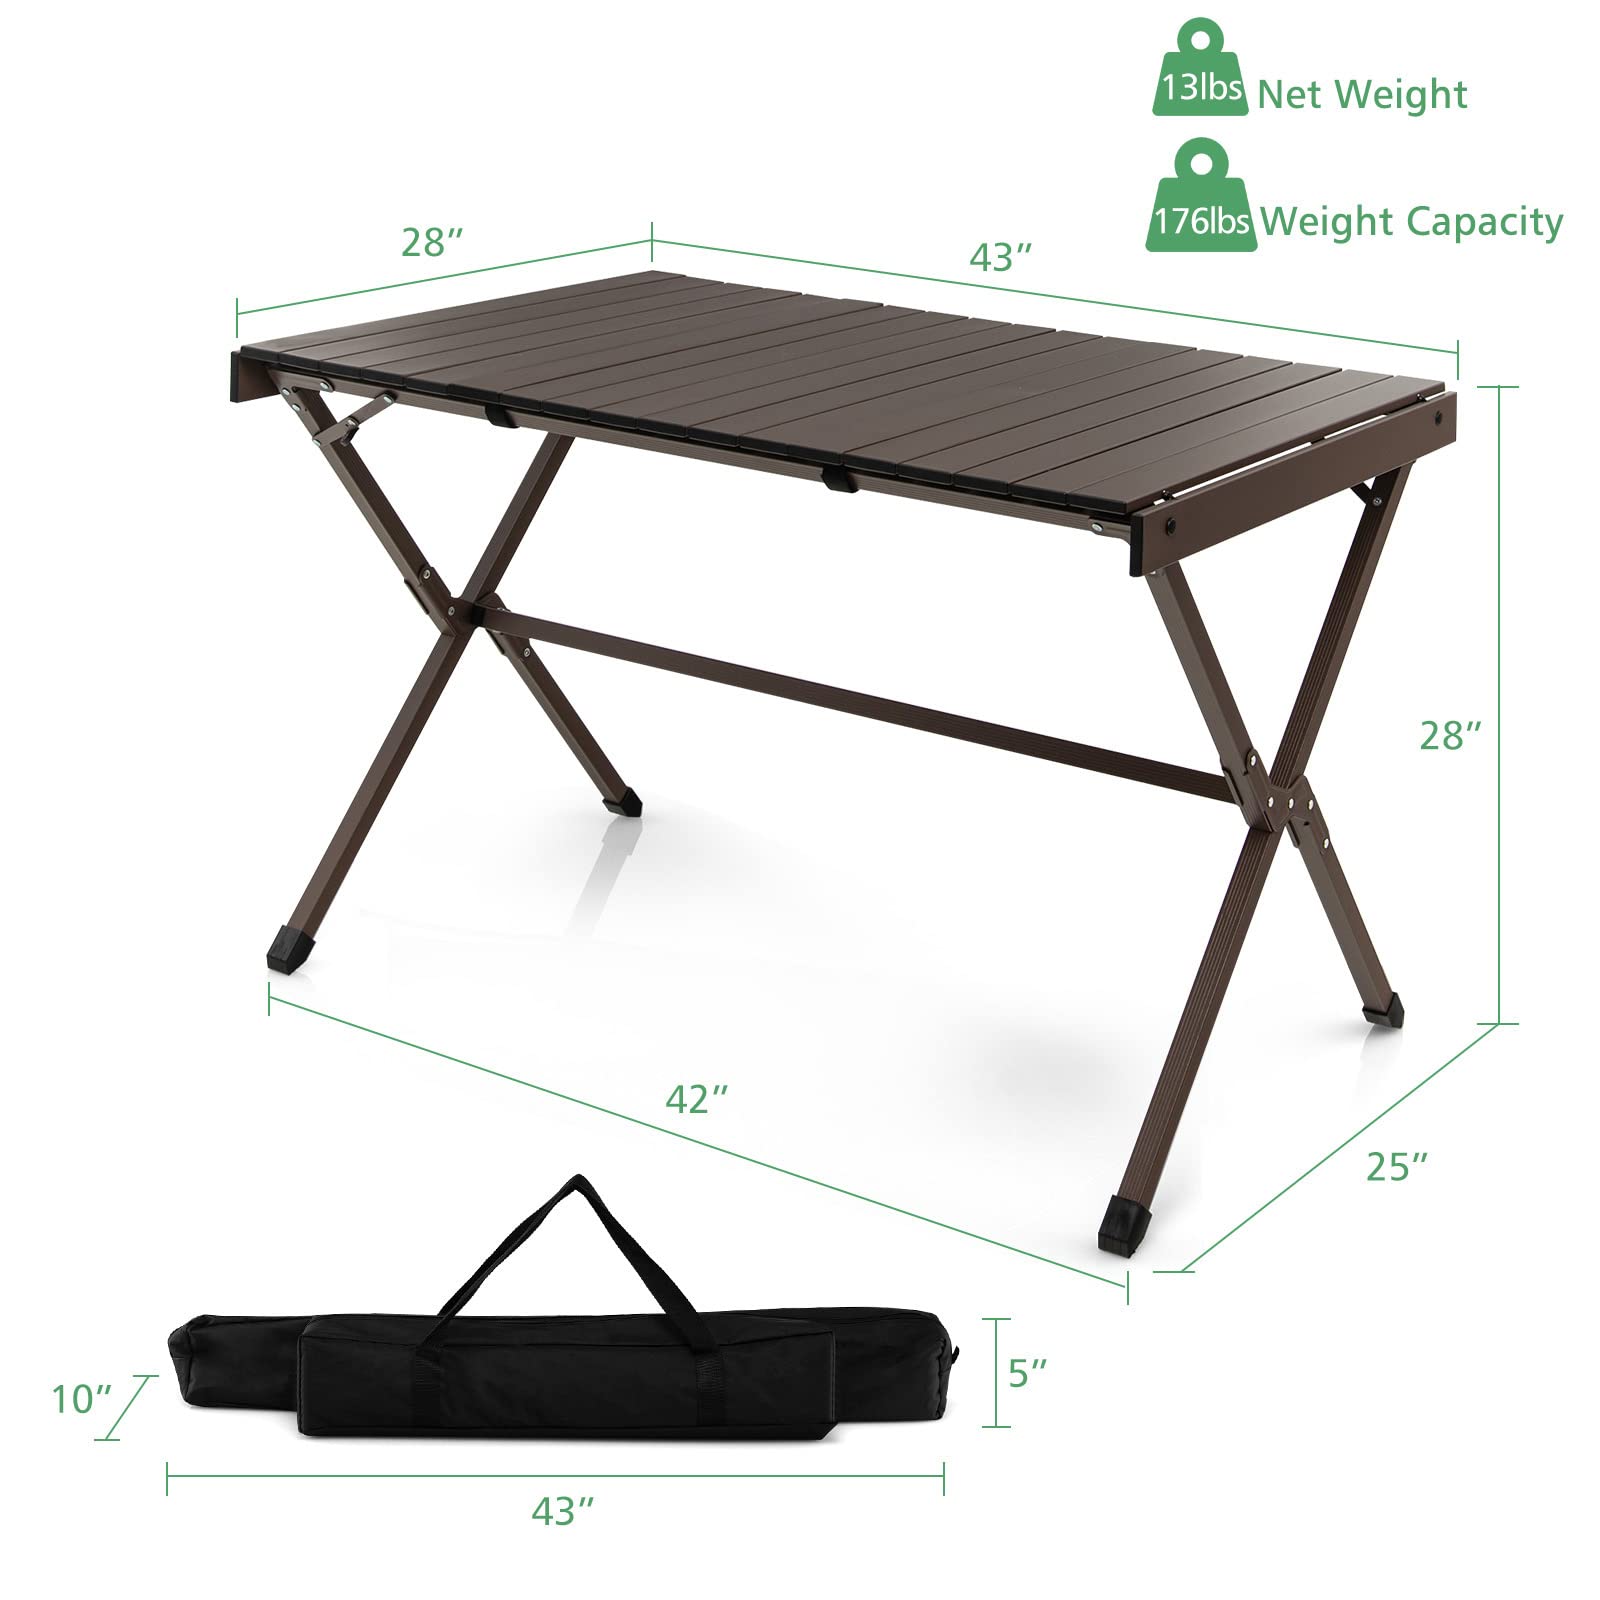 Giantex Folding Camping Table, Aluminum Picnic Table for 4-6 Person